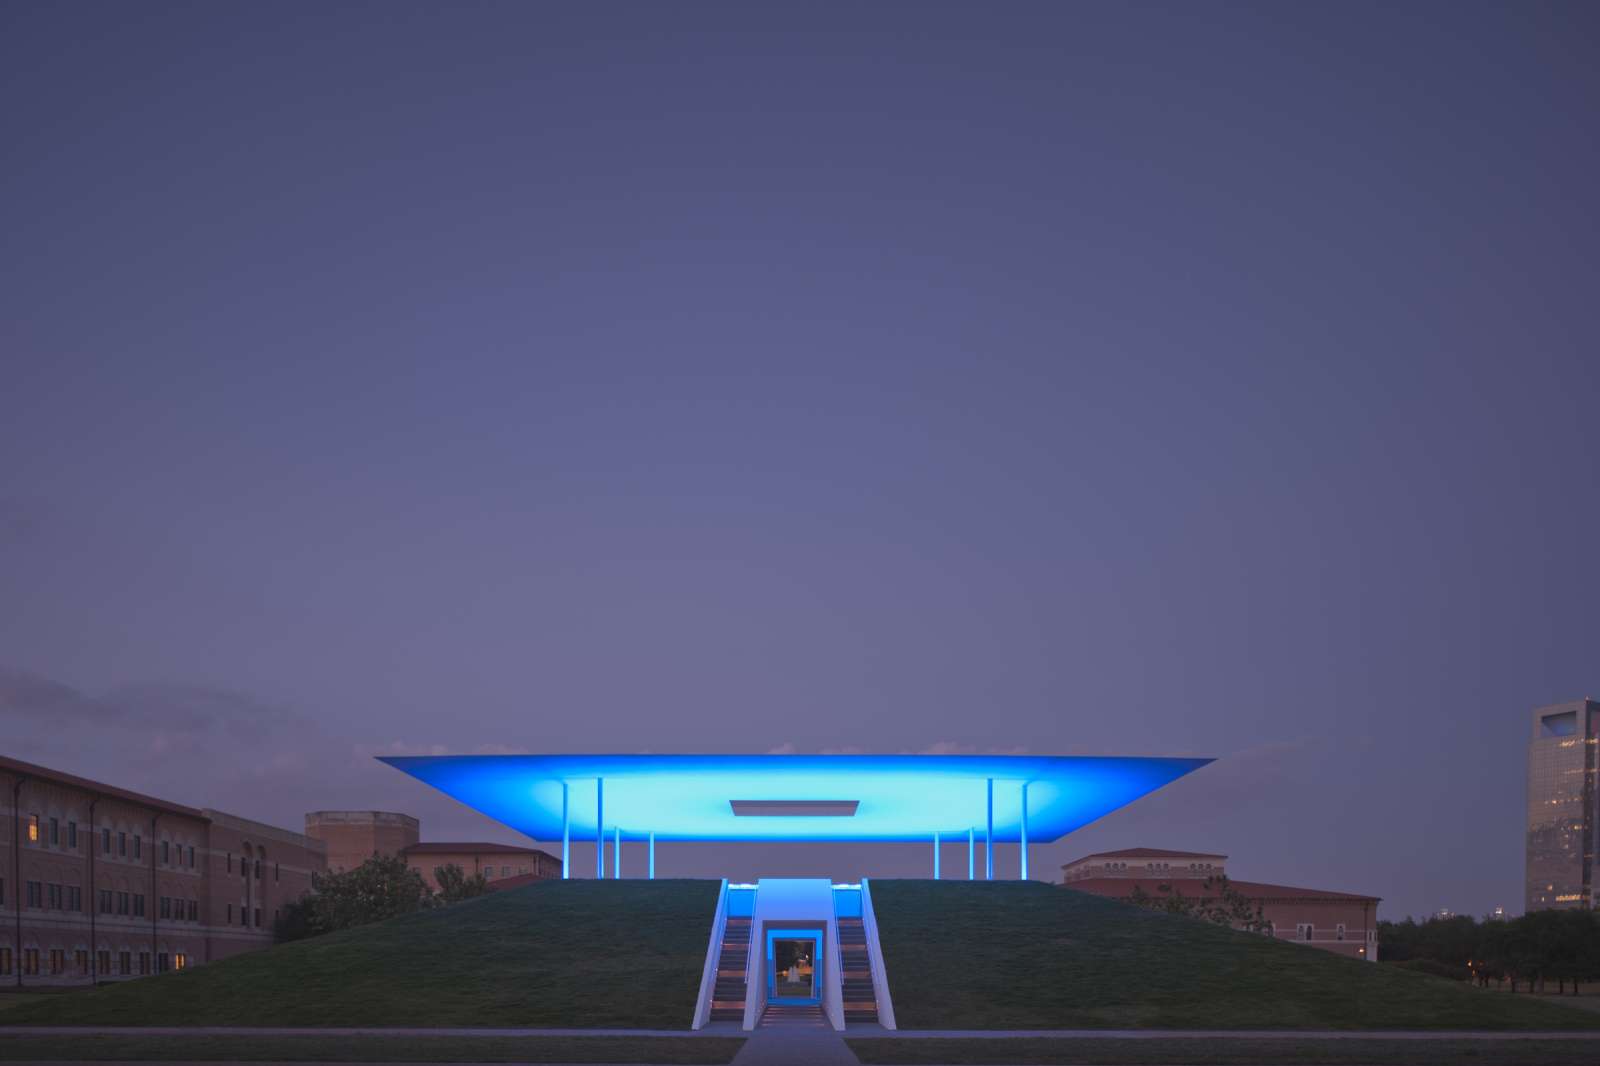 Twilight Epiphany (2012), The James Turrell Skyspace at the Suzanne Deal Booth Centennial Pavilion at Rice University. Photo Paul Hester. Image courtesy Rice University.